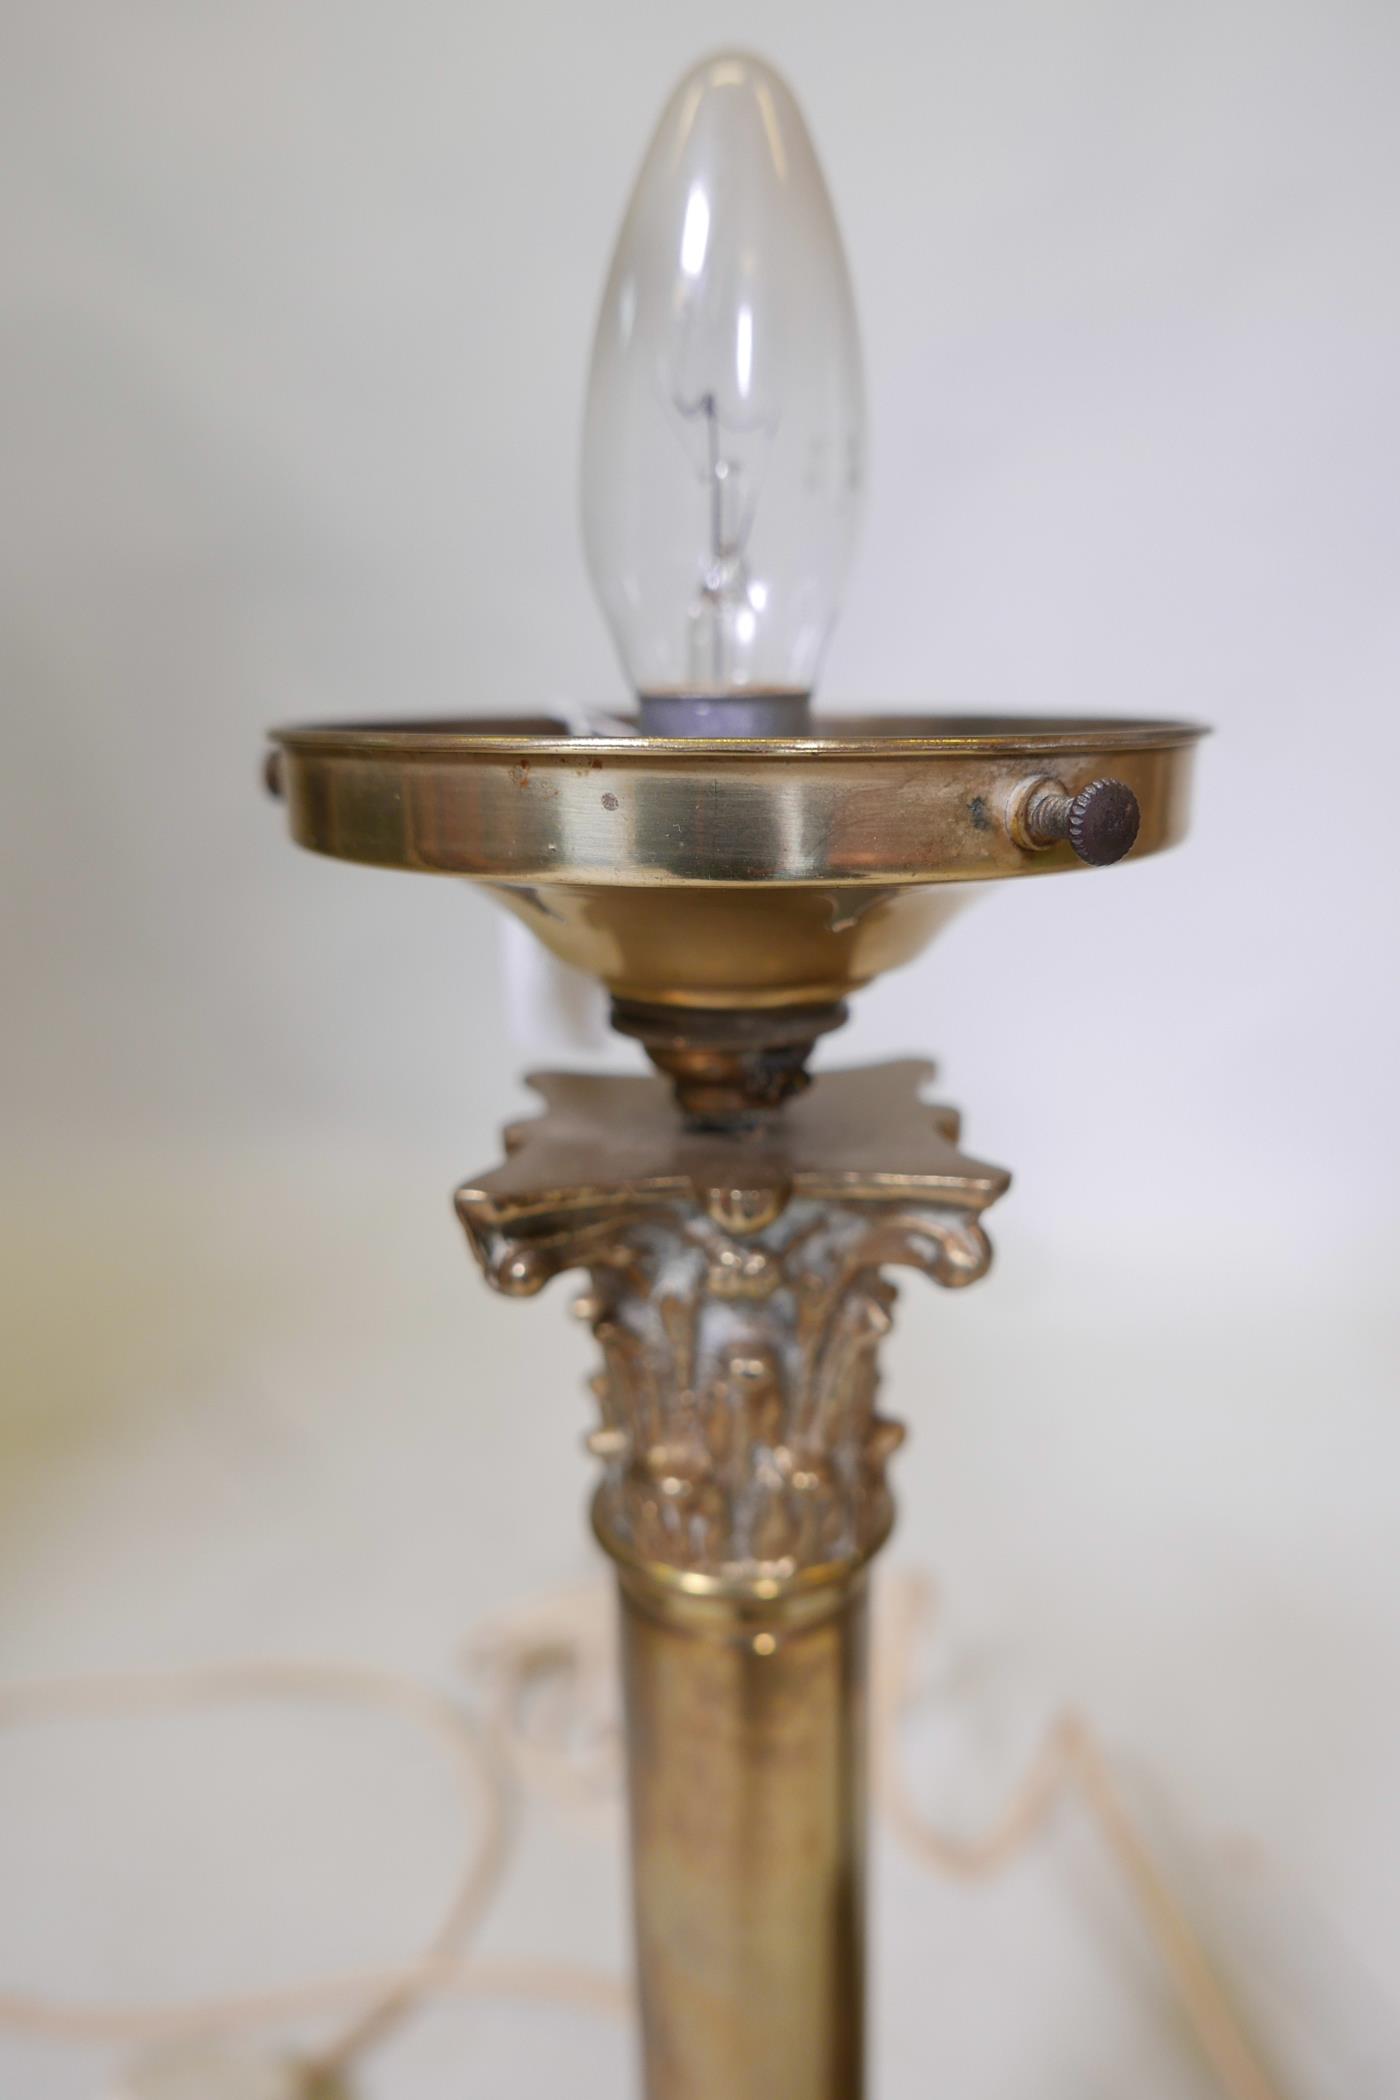 Three C19th brass Corinthian column table lamps, 15" high x 6" wide, A/F - Image 3 of 4